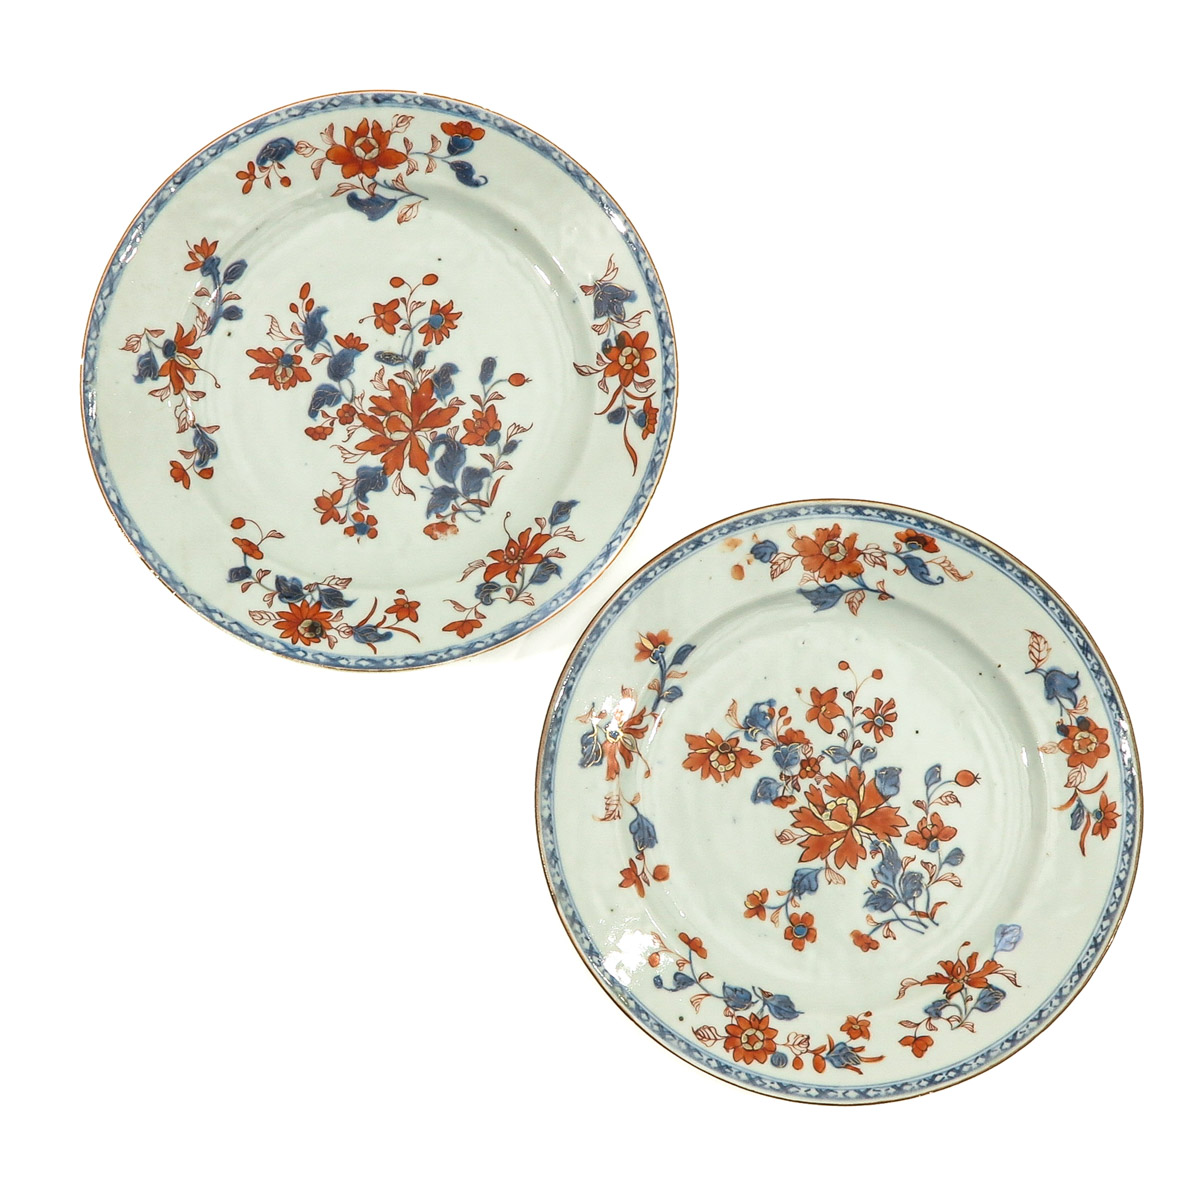 A Collection of 6 Imari Plates - Image 7 of 10